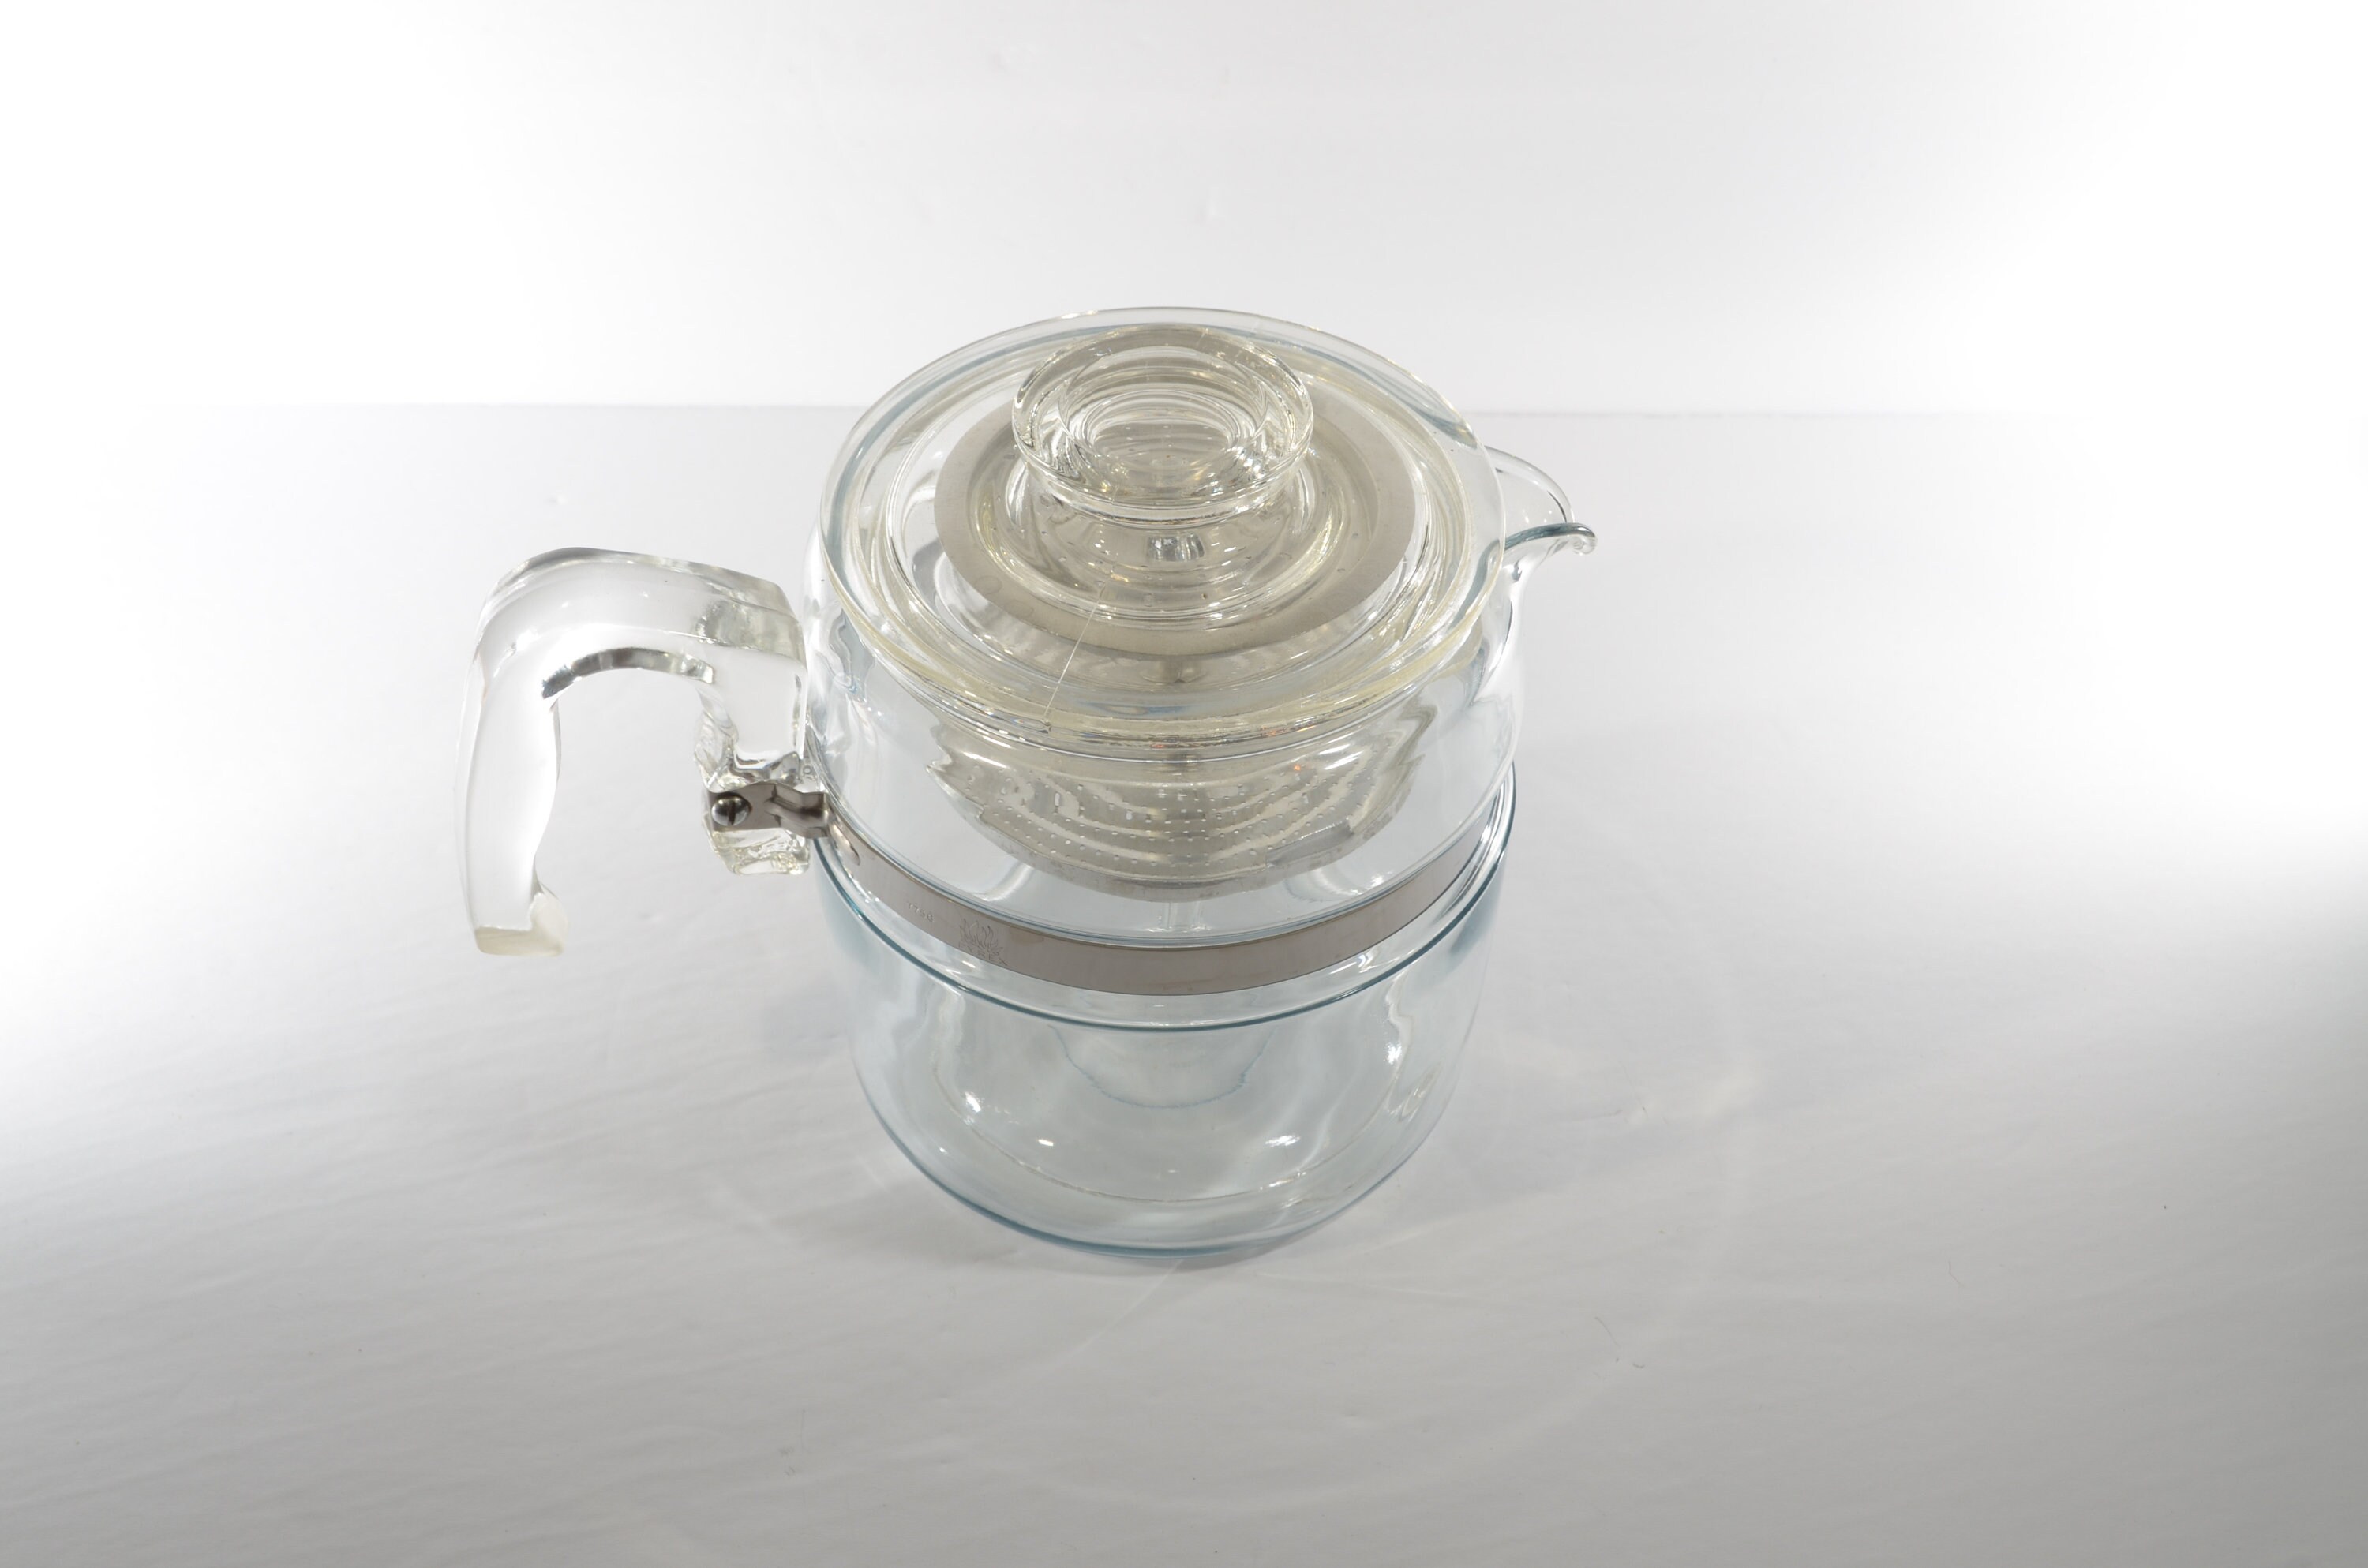 Vintage Pyrex Flameware 6 Cup Coffee Percolator (7756-B) Parts - Made In  USA - Sold Individually